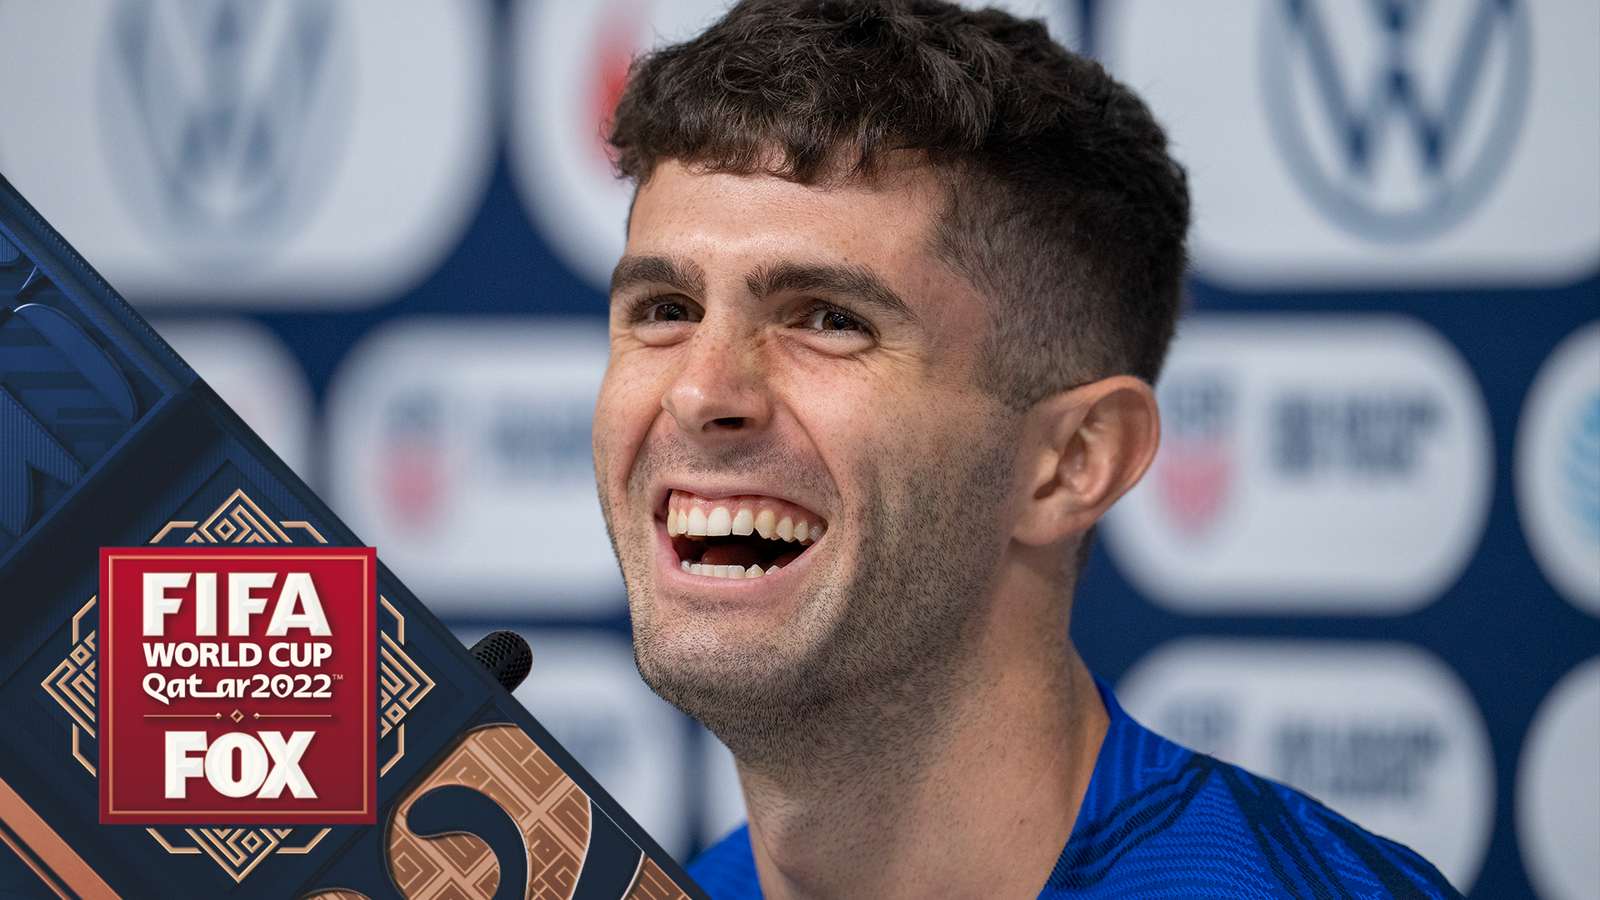 Christian Pulisic's news conference ahead of Netherlands game